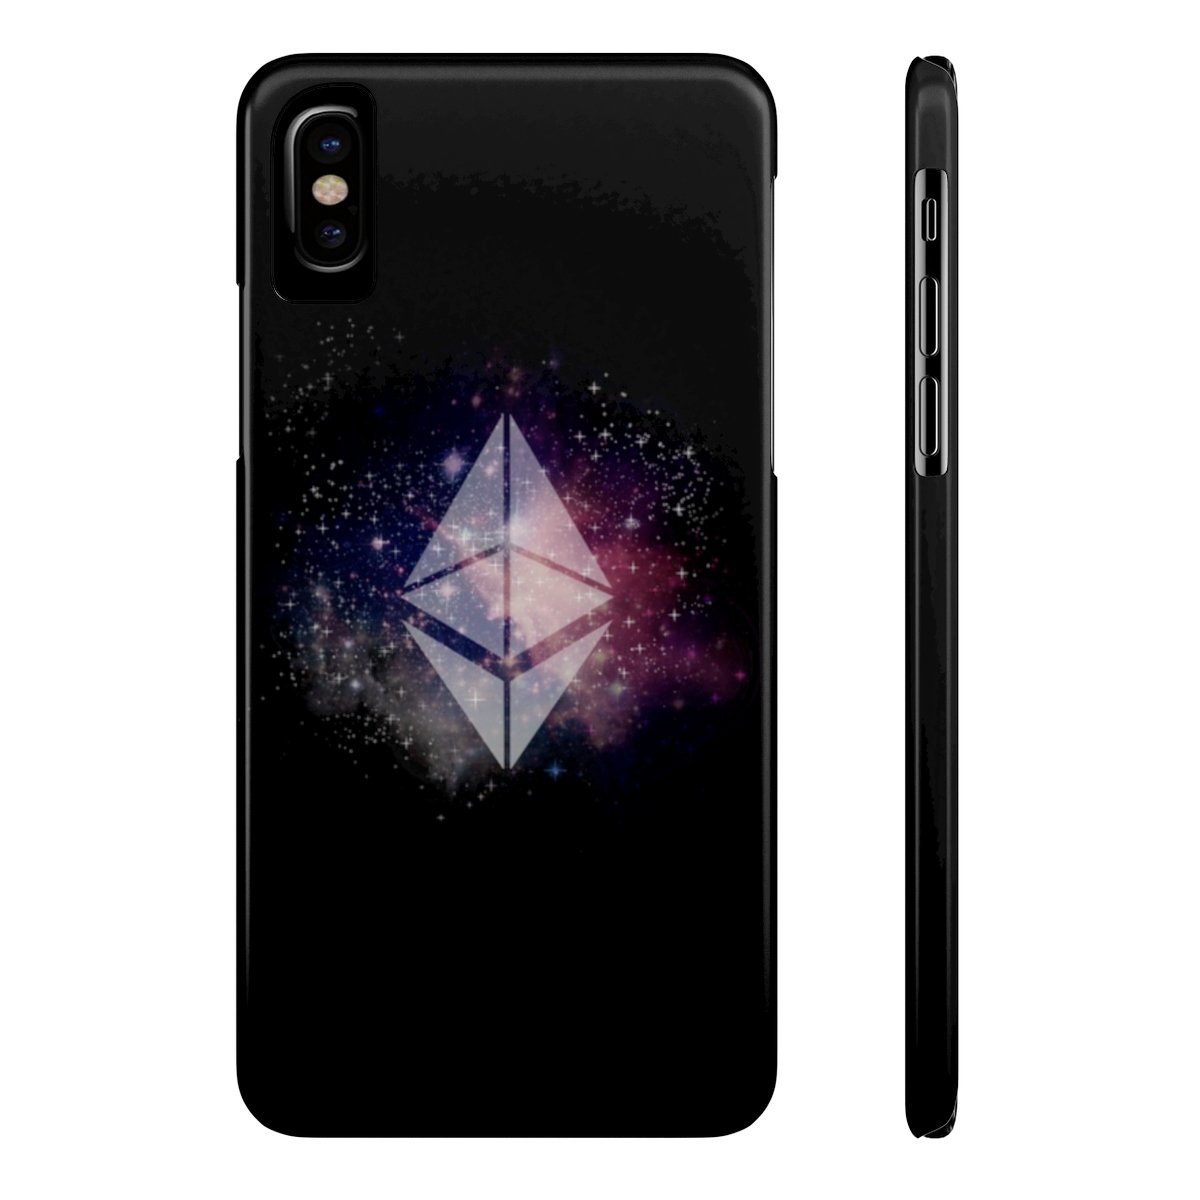 Vũ trụ Ethereum - Case Mate Slim Phone Case TCP1607 iPhone X Slim Official Crypto Merch